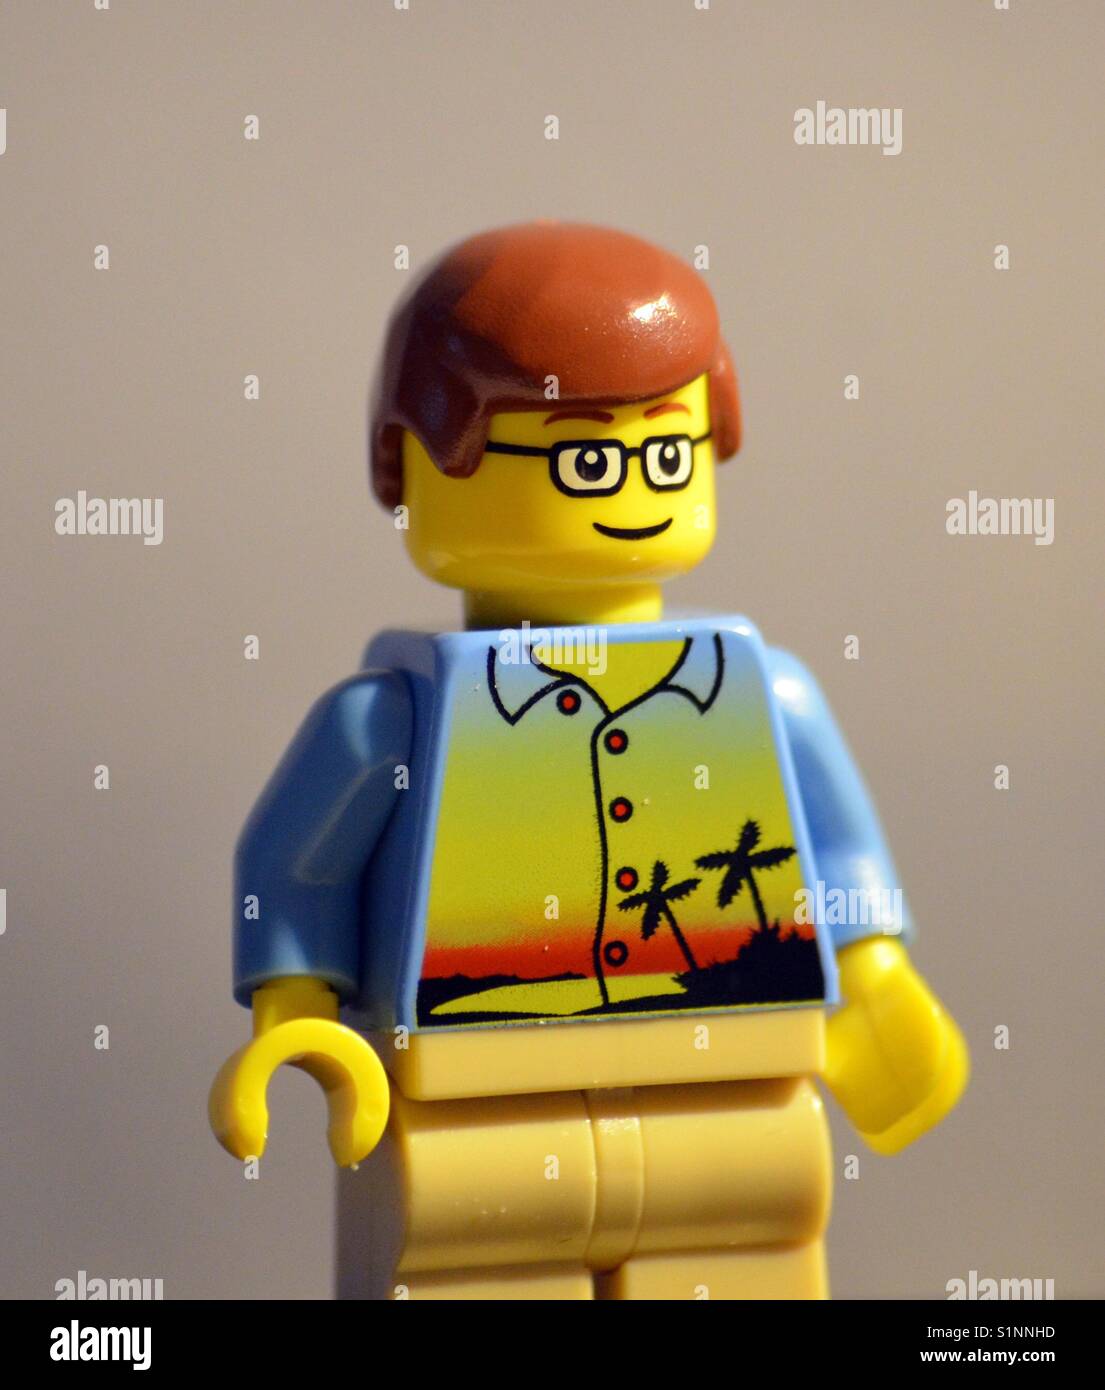 Lego Man High Resolution Stock Photography and Images - Alamy